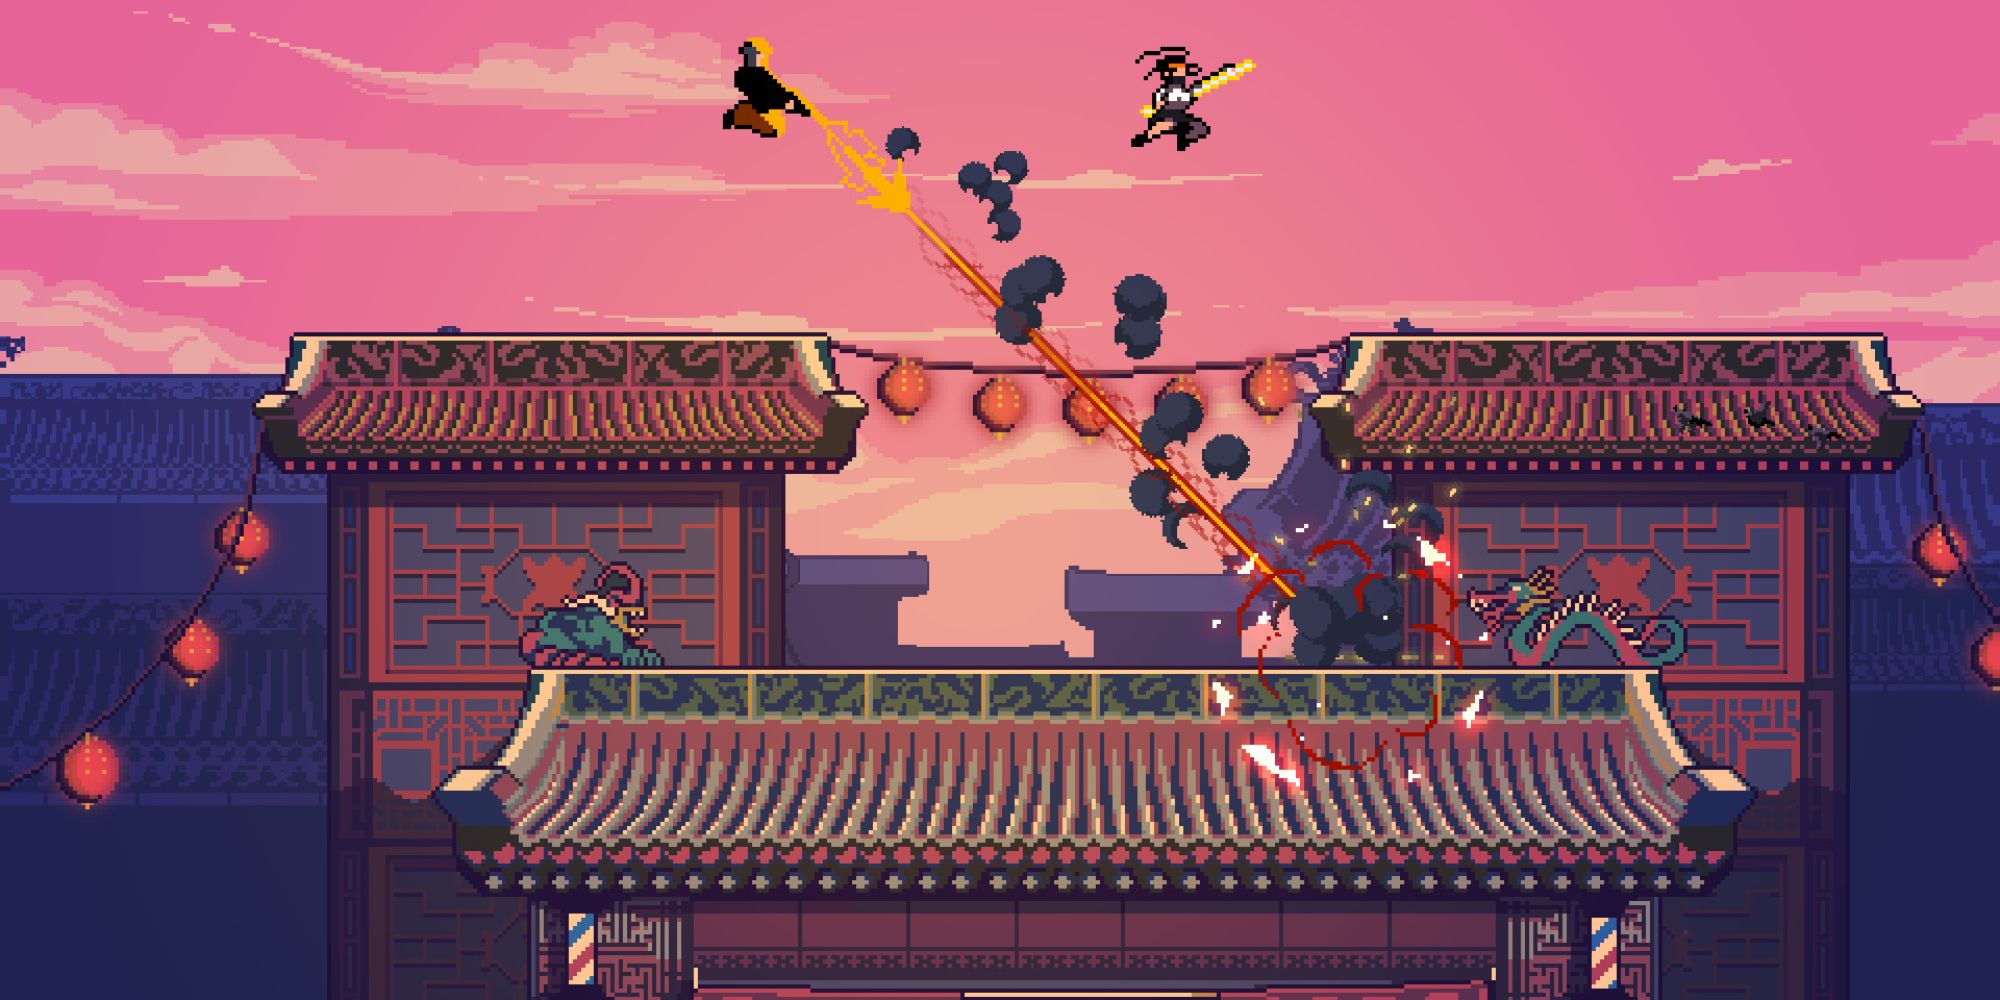 Roof Rage characters fighting in mid-air